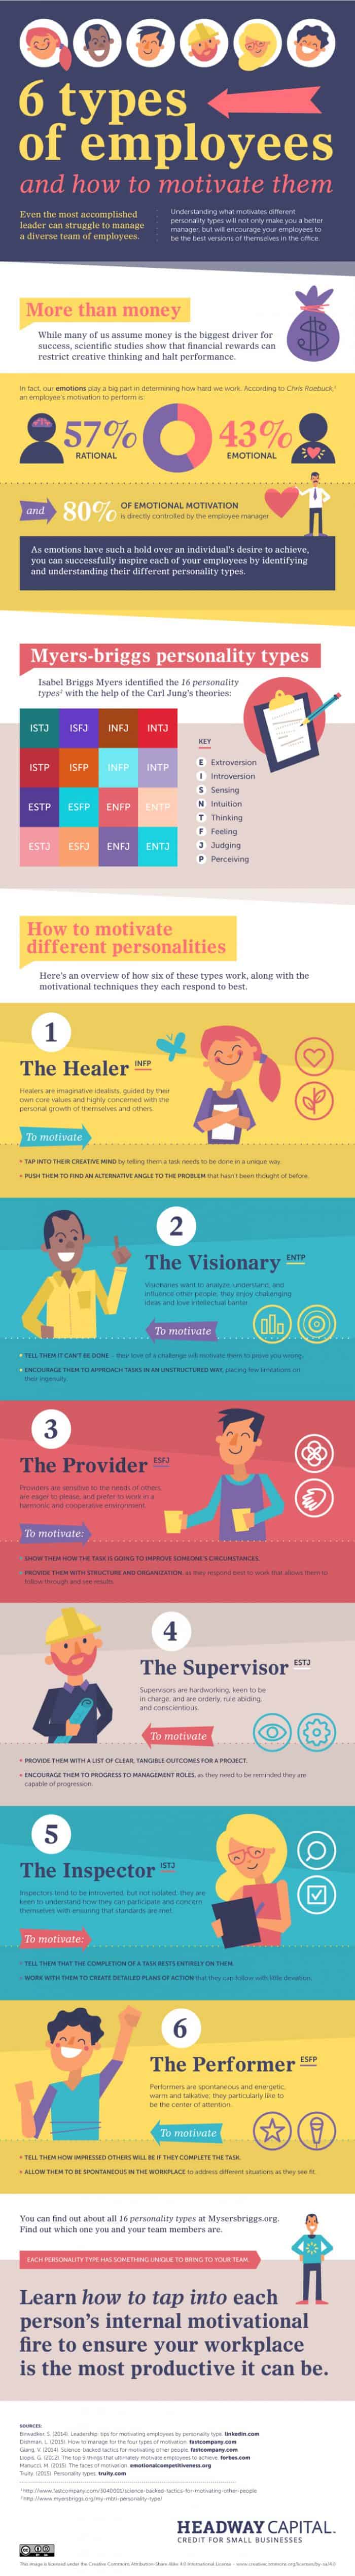 6 Types of Employees and How to Motivate Them